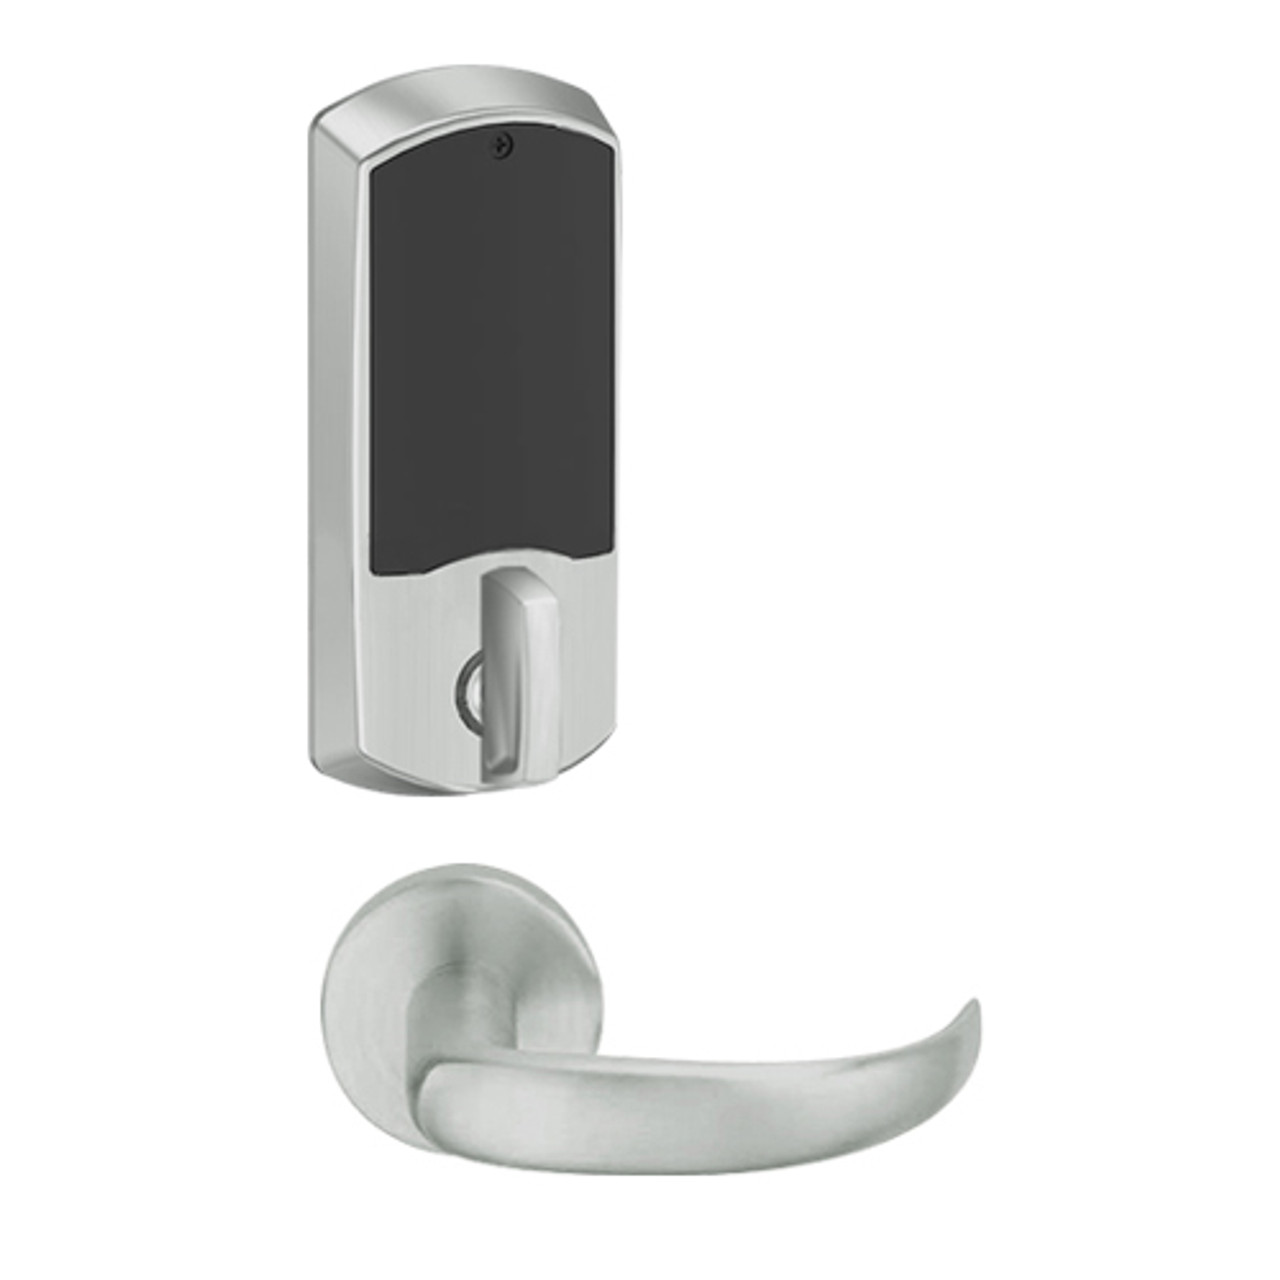 LEMD-GRW-P-17-619-00C Schlage Privacy/Apartment Wireless Greenwich Mortise Deadbolt Lock with LED and Sparta Lever in Satin Nickel